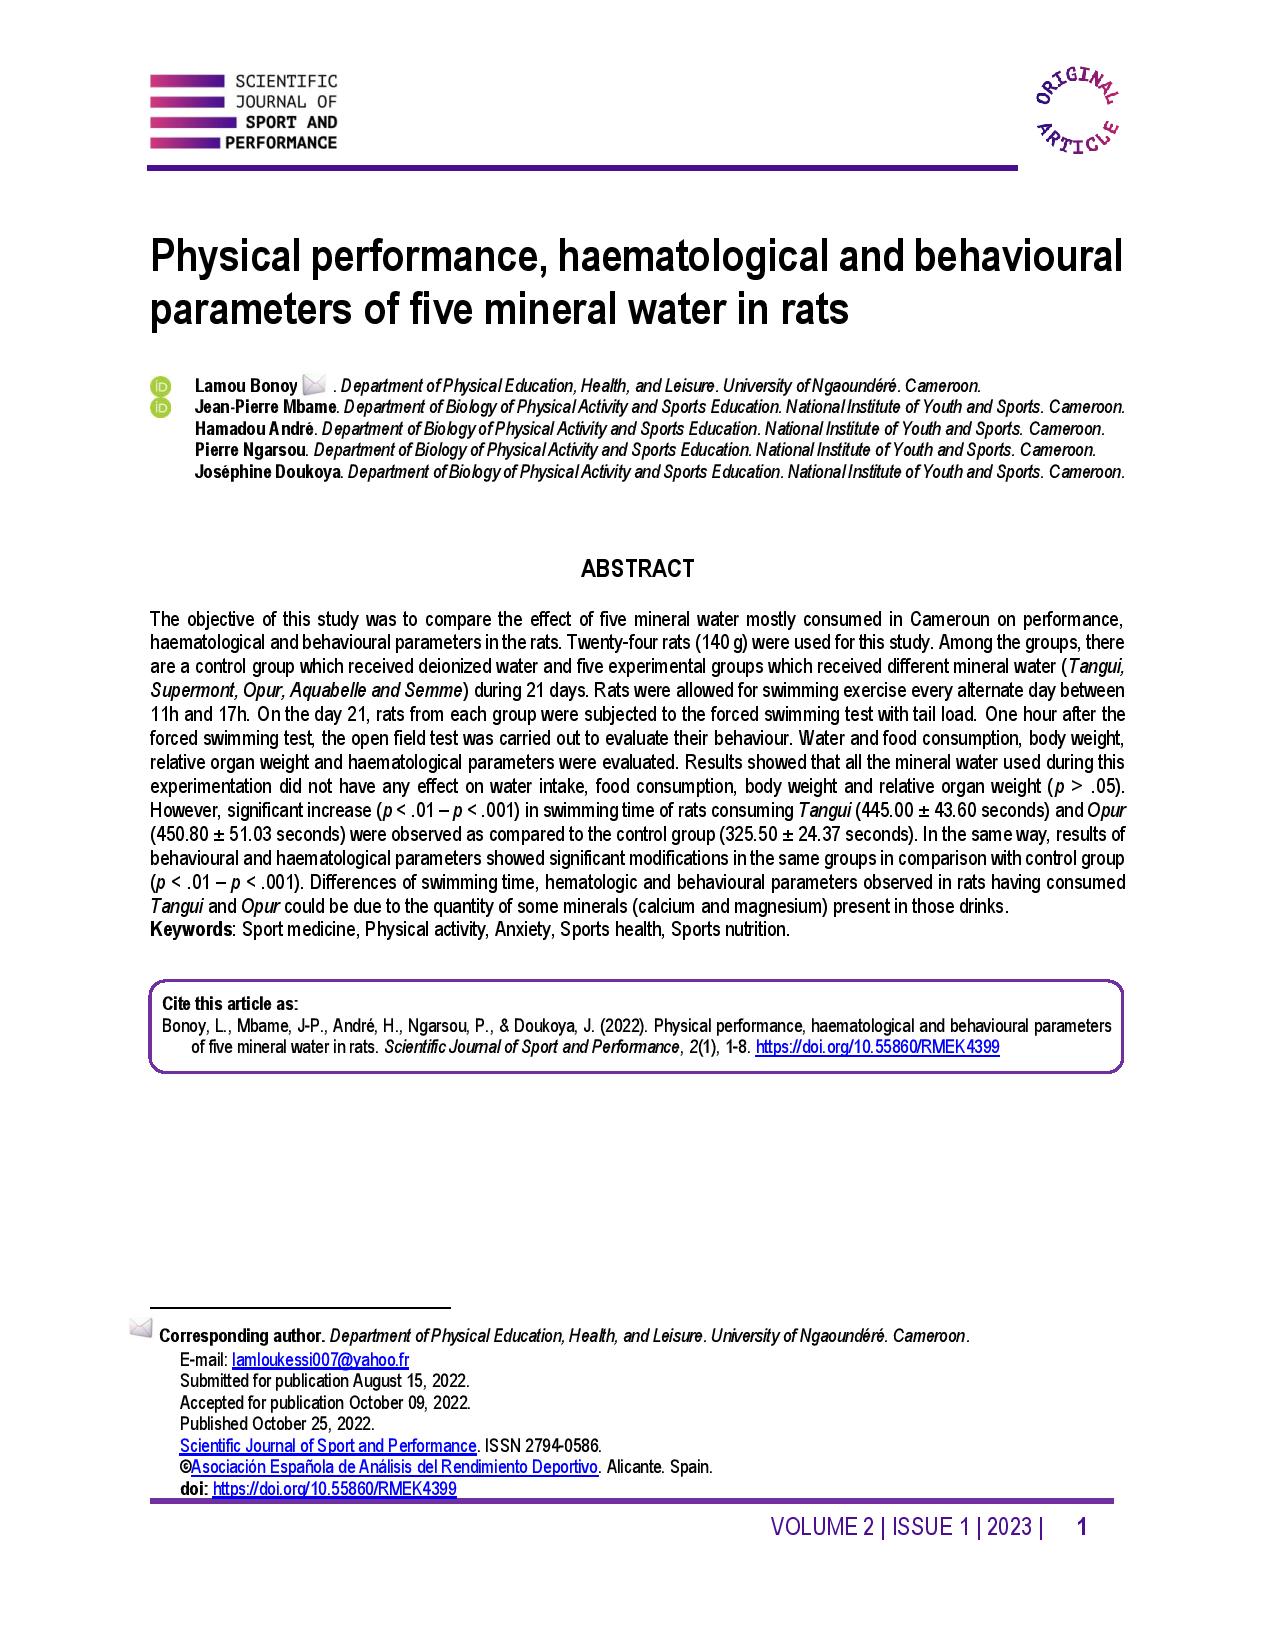 Physical performance, haematological and behavioural parameters of five mineral water in rats